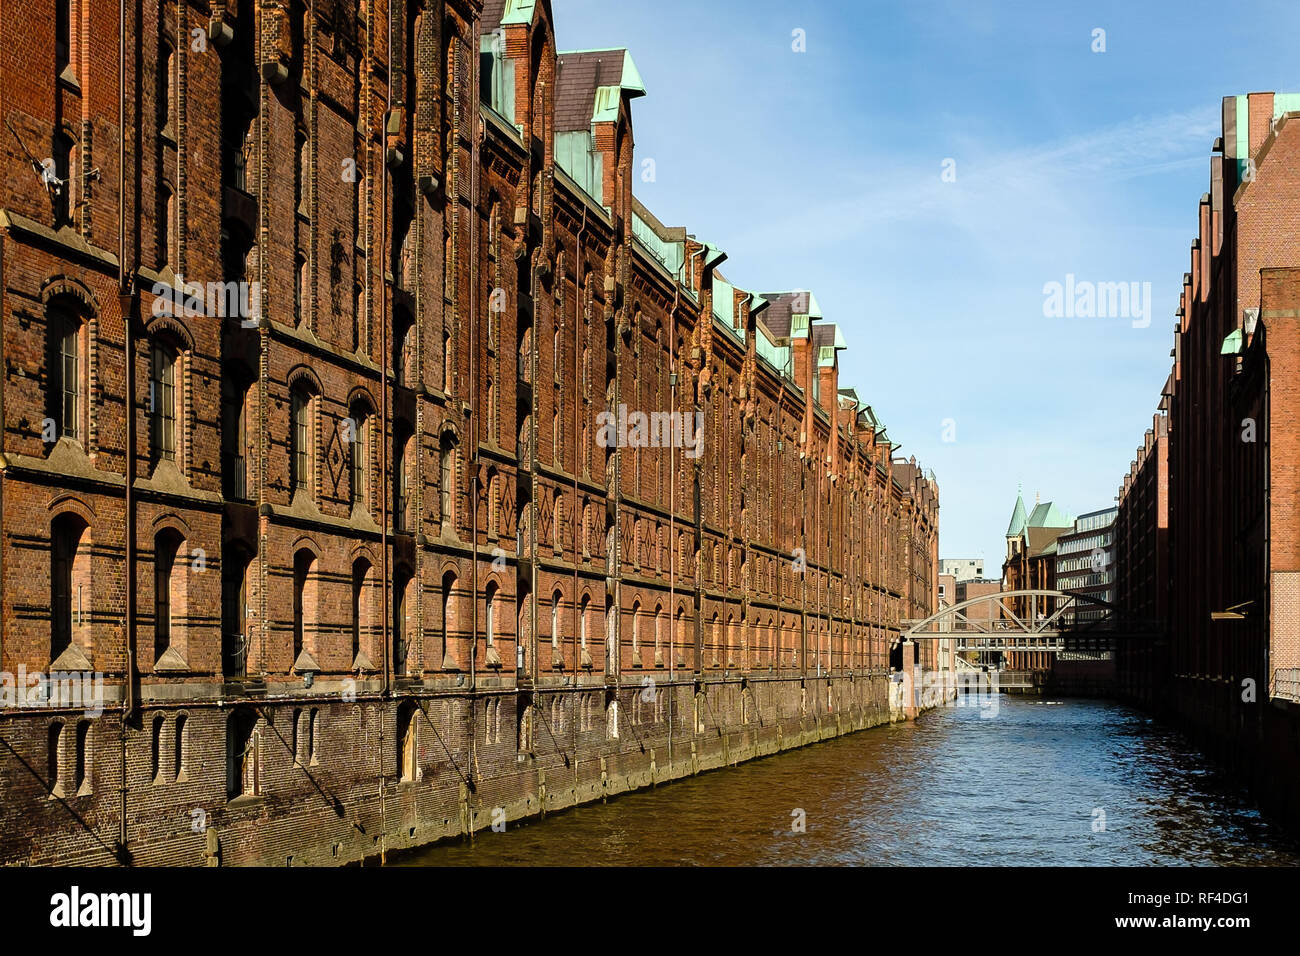 beautiful view over warehouse district against river and sky, Hamburg, Germany Stock Photo